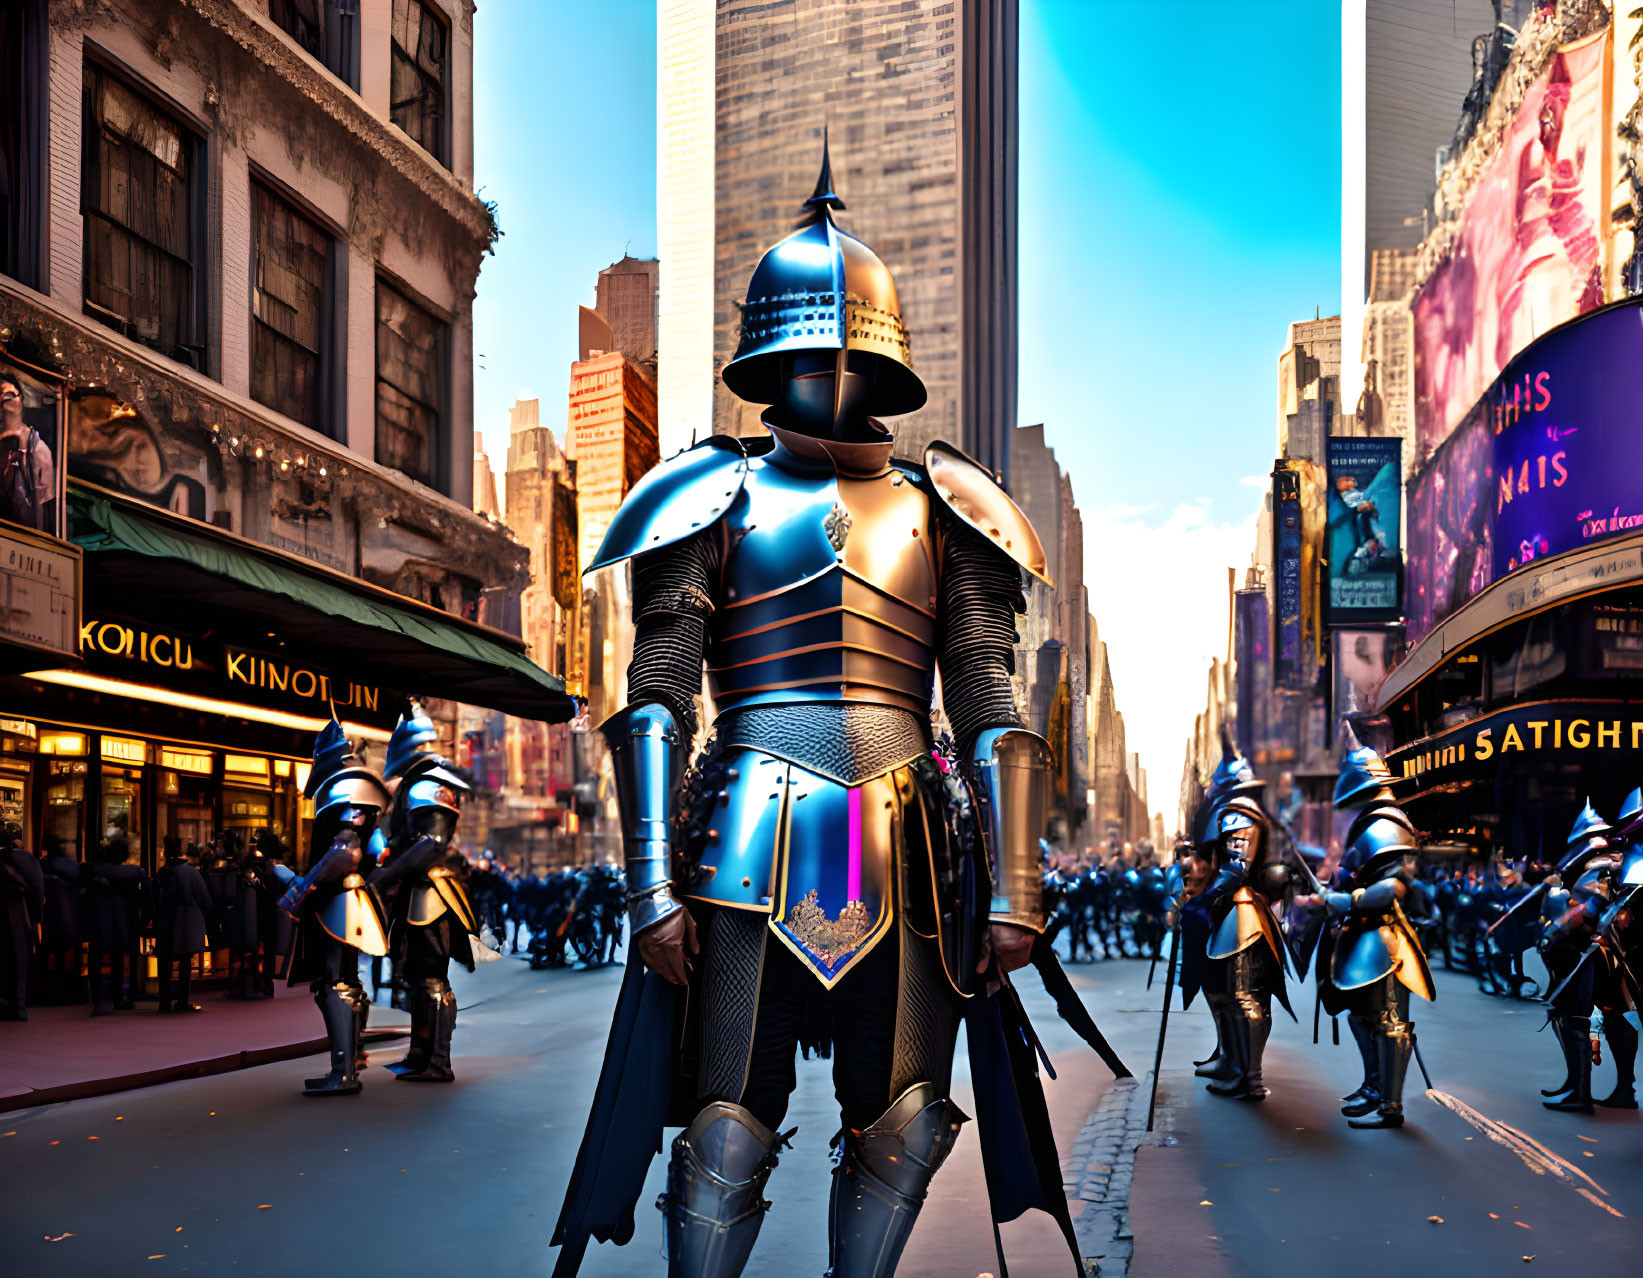 Knights on Broadway (Wasn't it a Bee Gees Hit ;-)